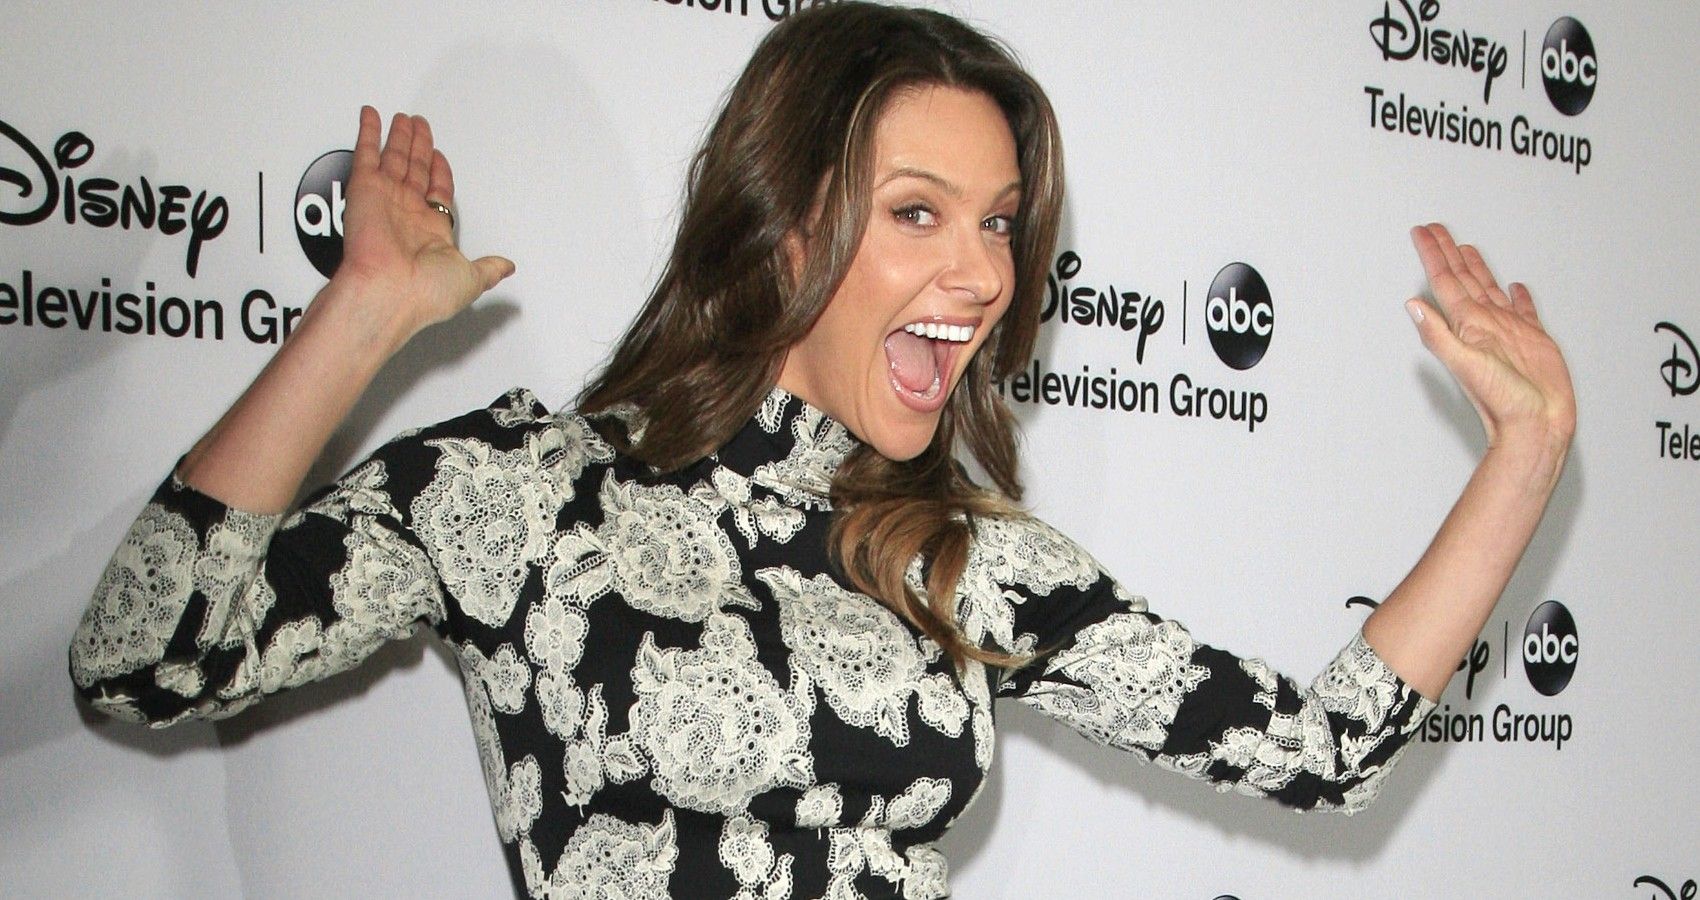 Jill Wagner Expecting Second Child With David Lemanowicz